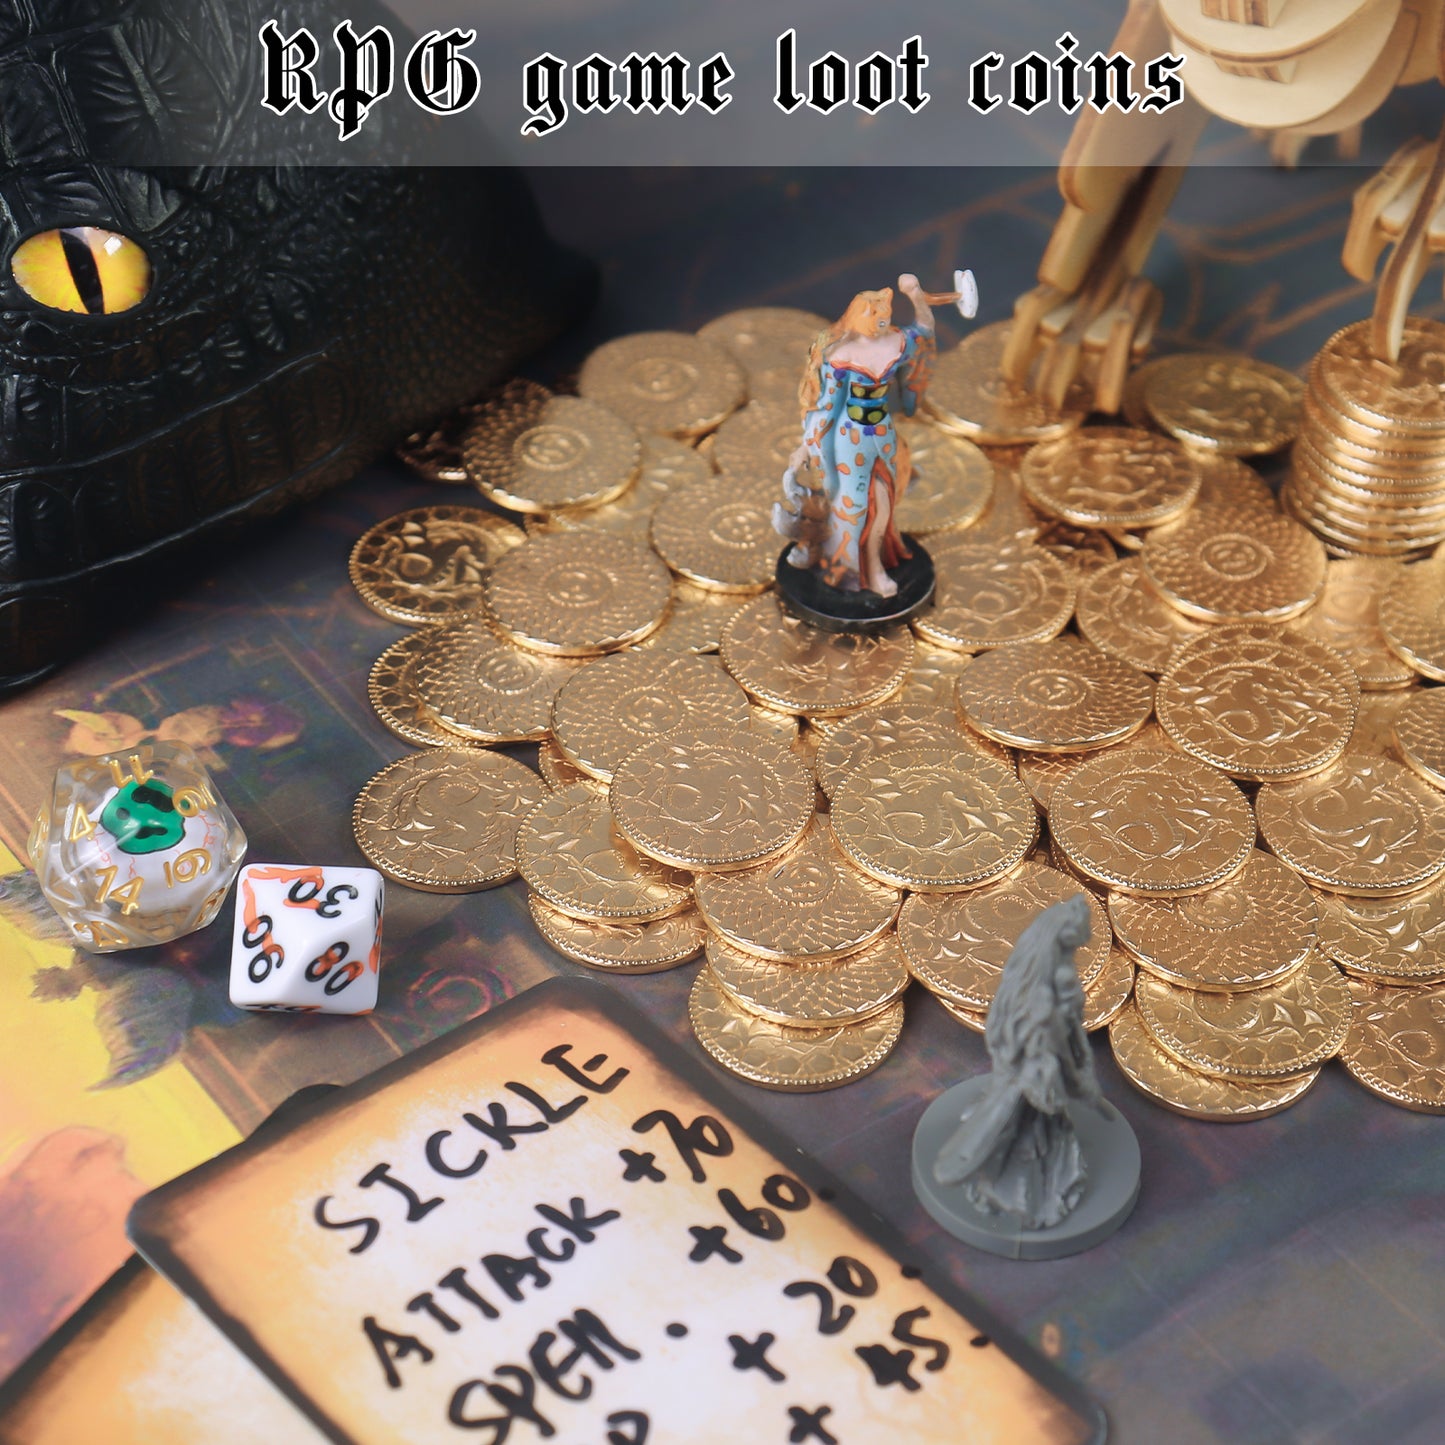 50 PCS Metal DND Coins with PU Leather Bag, Fantasy Gold Coins for Board Games, Game Tokens for Tabletop RPG Games, Black Dragon Bag D and D Coins Collection, Mid-Century Retro Gaming Accessories